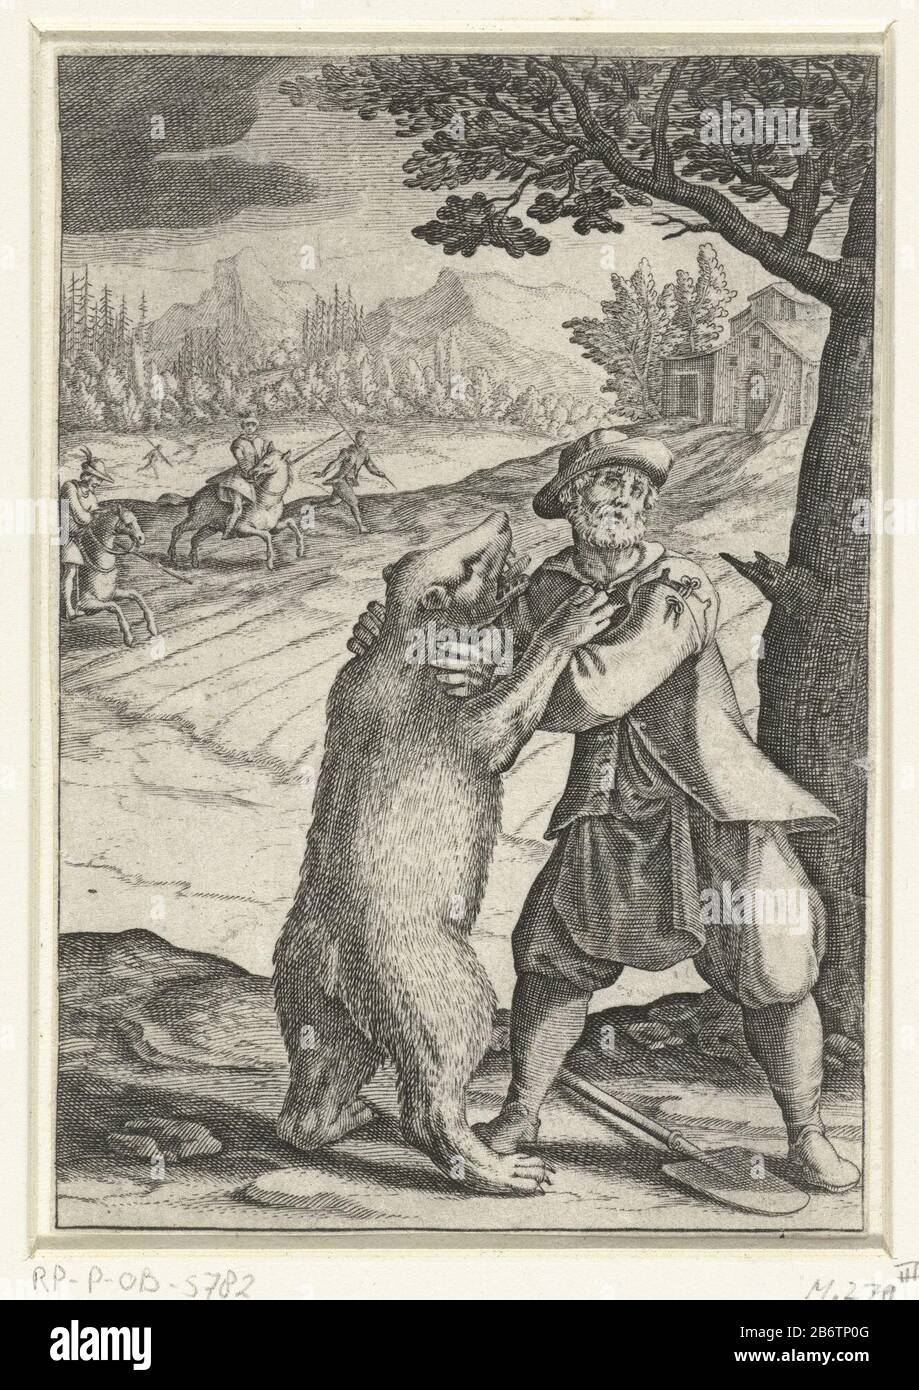 Het wonder van Spadino en de beer a man fights with a bear. In the background, two horsemen and two pedestrians in a mountain landscape near a huisje. Manufacturer : printmaker Jacques CallotPlaats manufacture: Florence Date: 1614 Physical features: car material: paper Technique: engra (printing process) Dimensions: sheet: h (cut off part of margin) 118 mm b × 81 mmToelichtingGebruikt as illustration in: Gio. Angiolo Lottini, "Scelta d'alcuni miracoli e grazie della Santissima nunziata di Firenze '(a book about miracles done by Our Lady of the Annunicatie Florence, three editions in Florence, Stock Photo